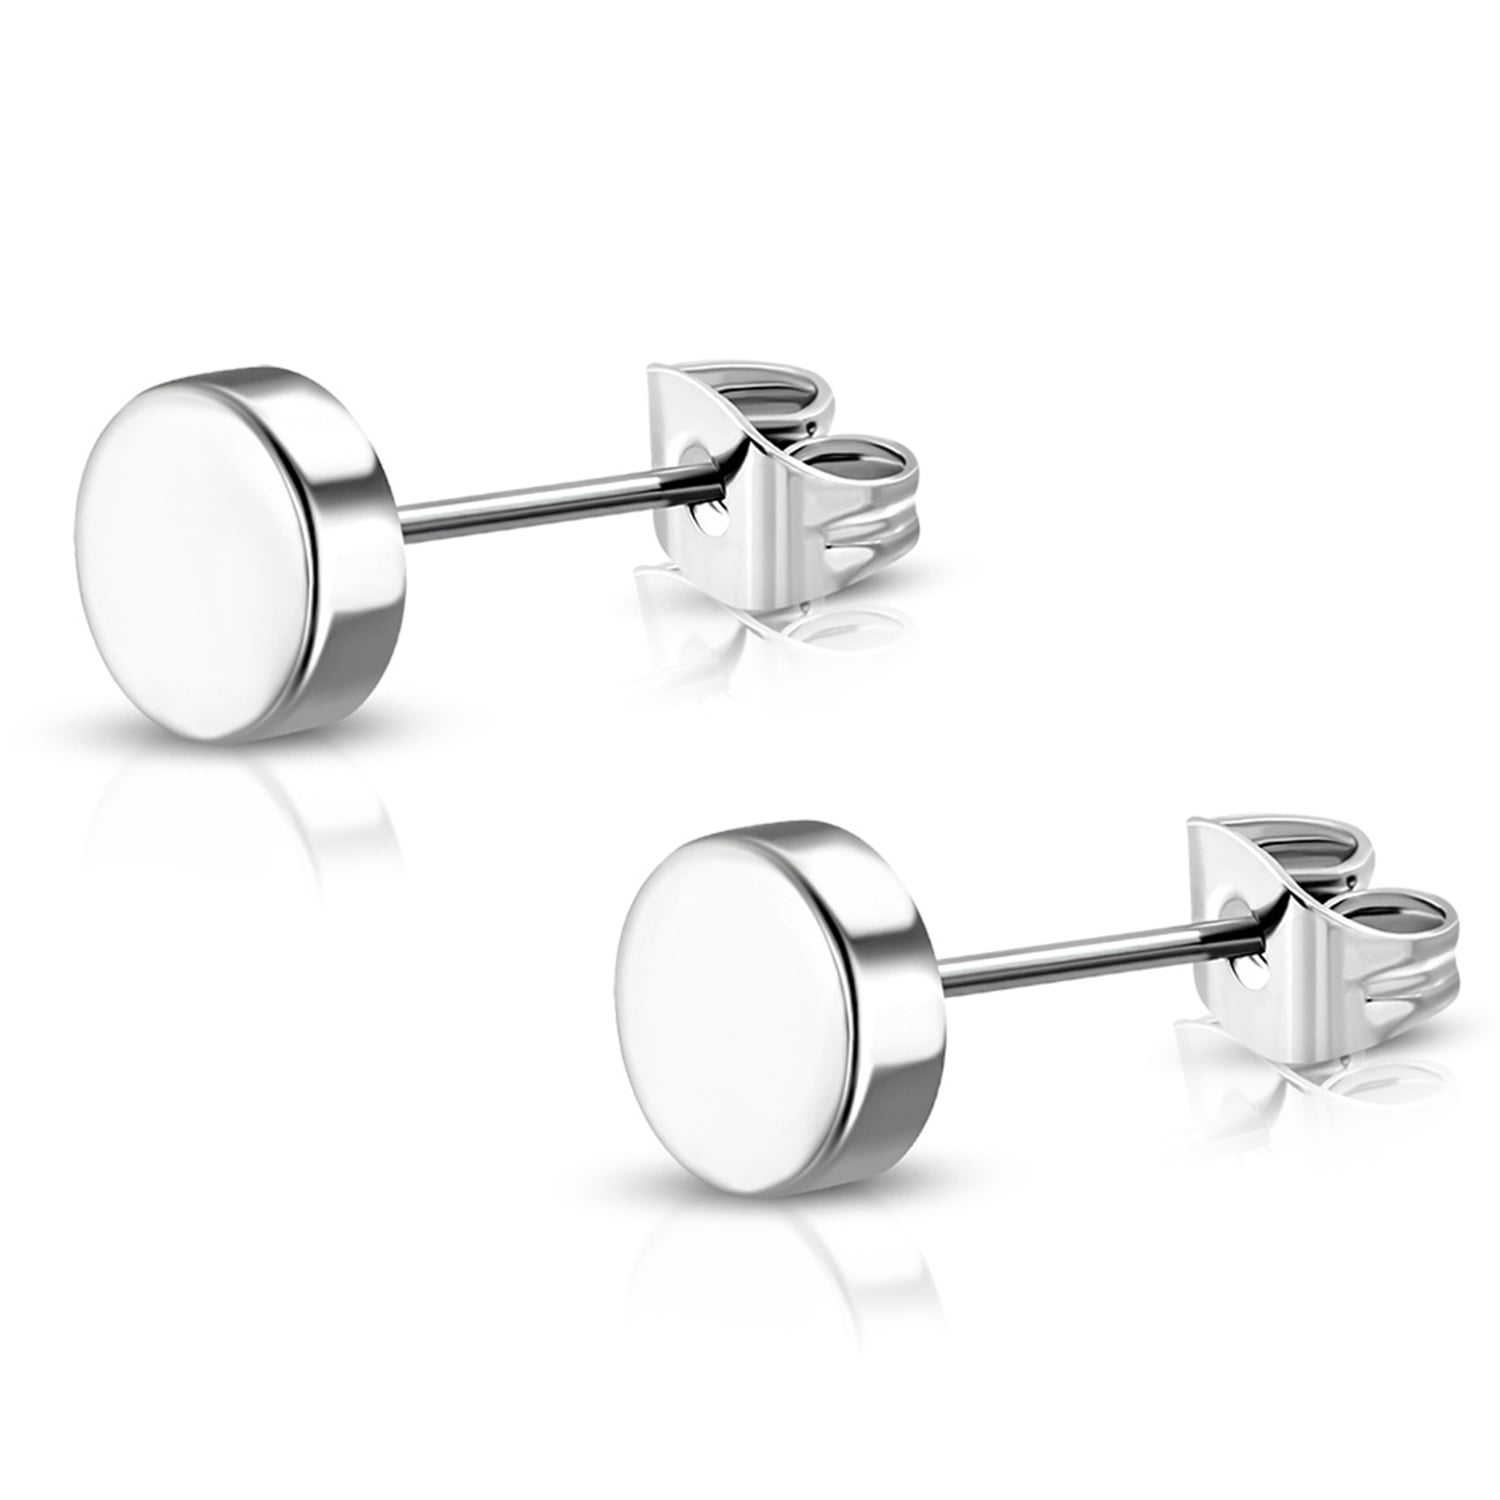 Stainless Steel Illusion Round Circle Button Stud Post Earrings